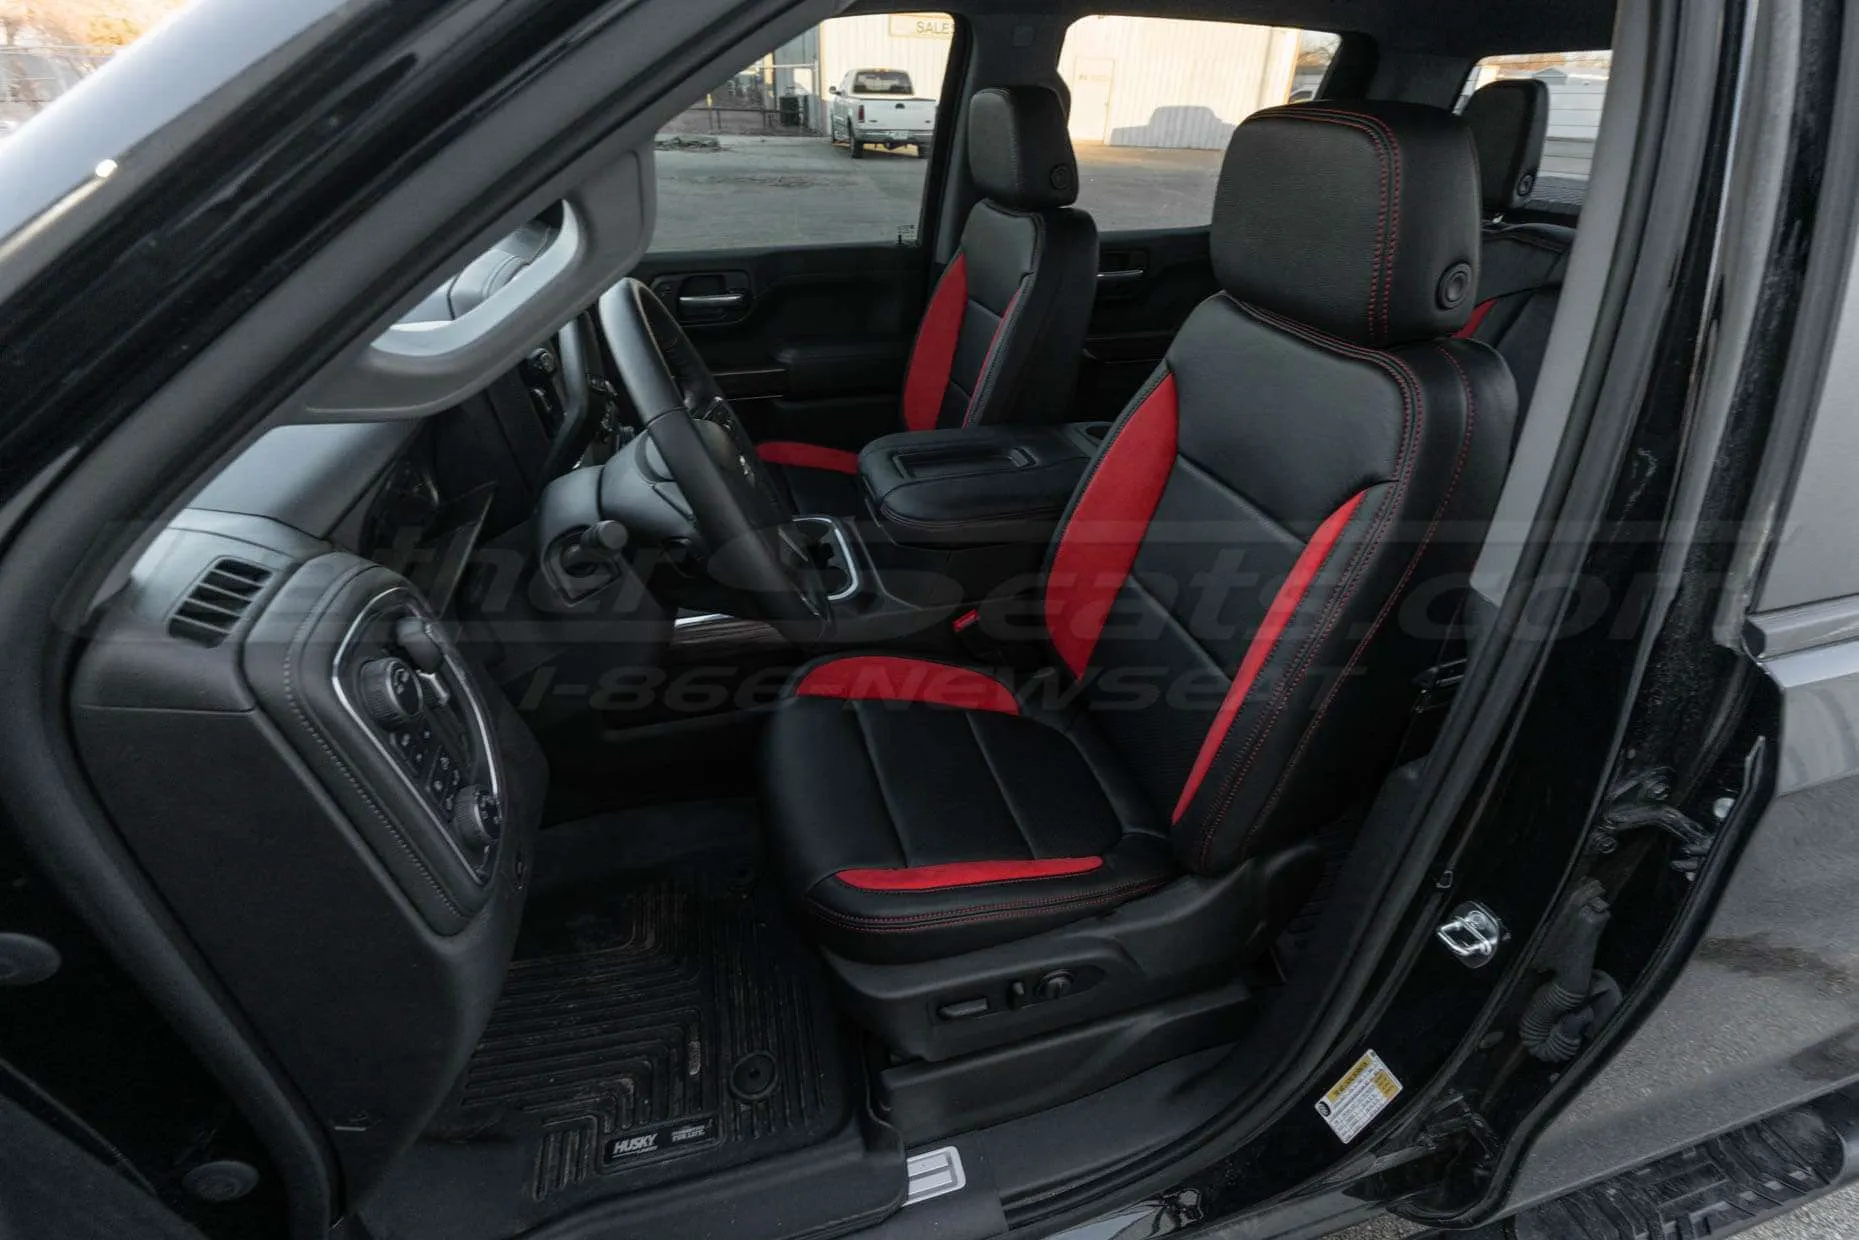 2021 Chevrolet Silverado Crew Cab Installed Leather Seats - Black & Red - Front seats